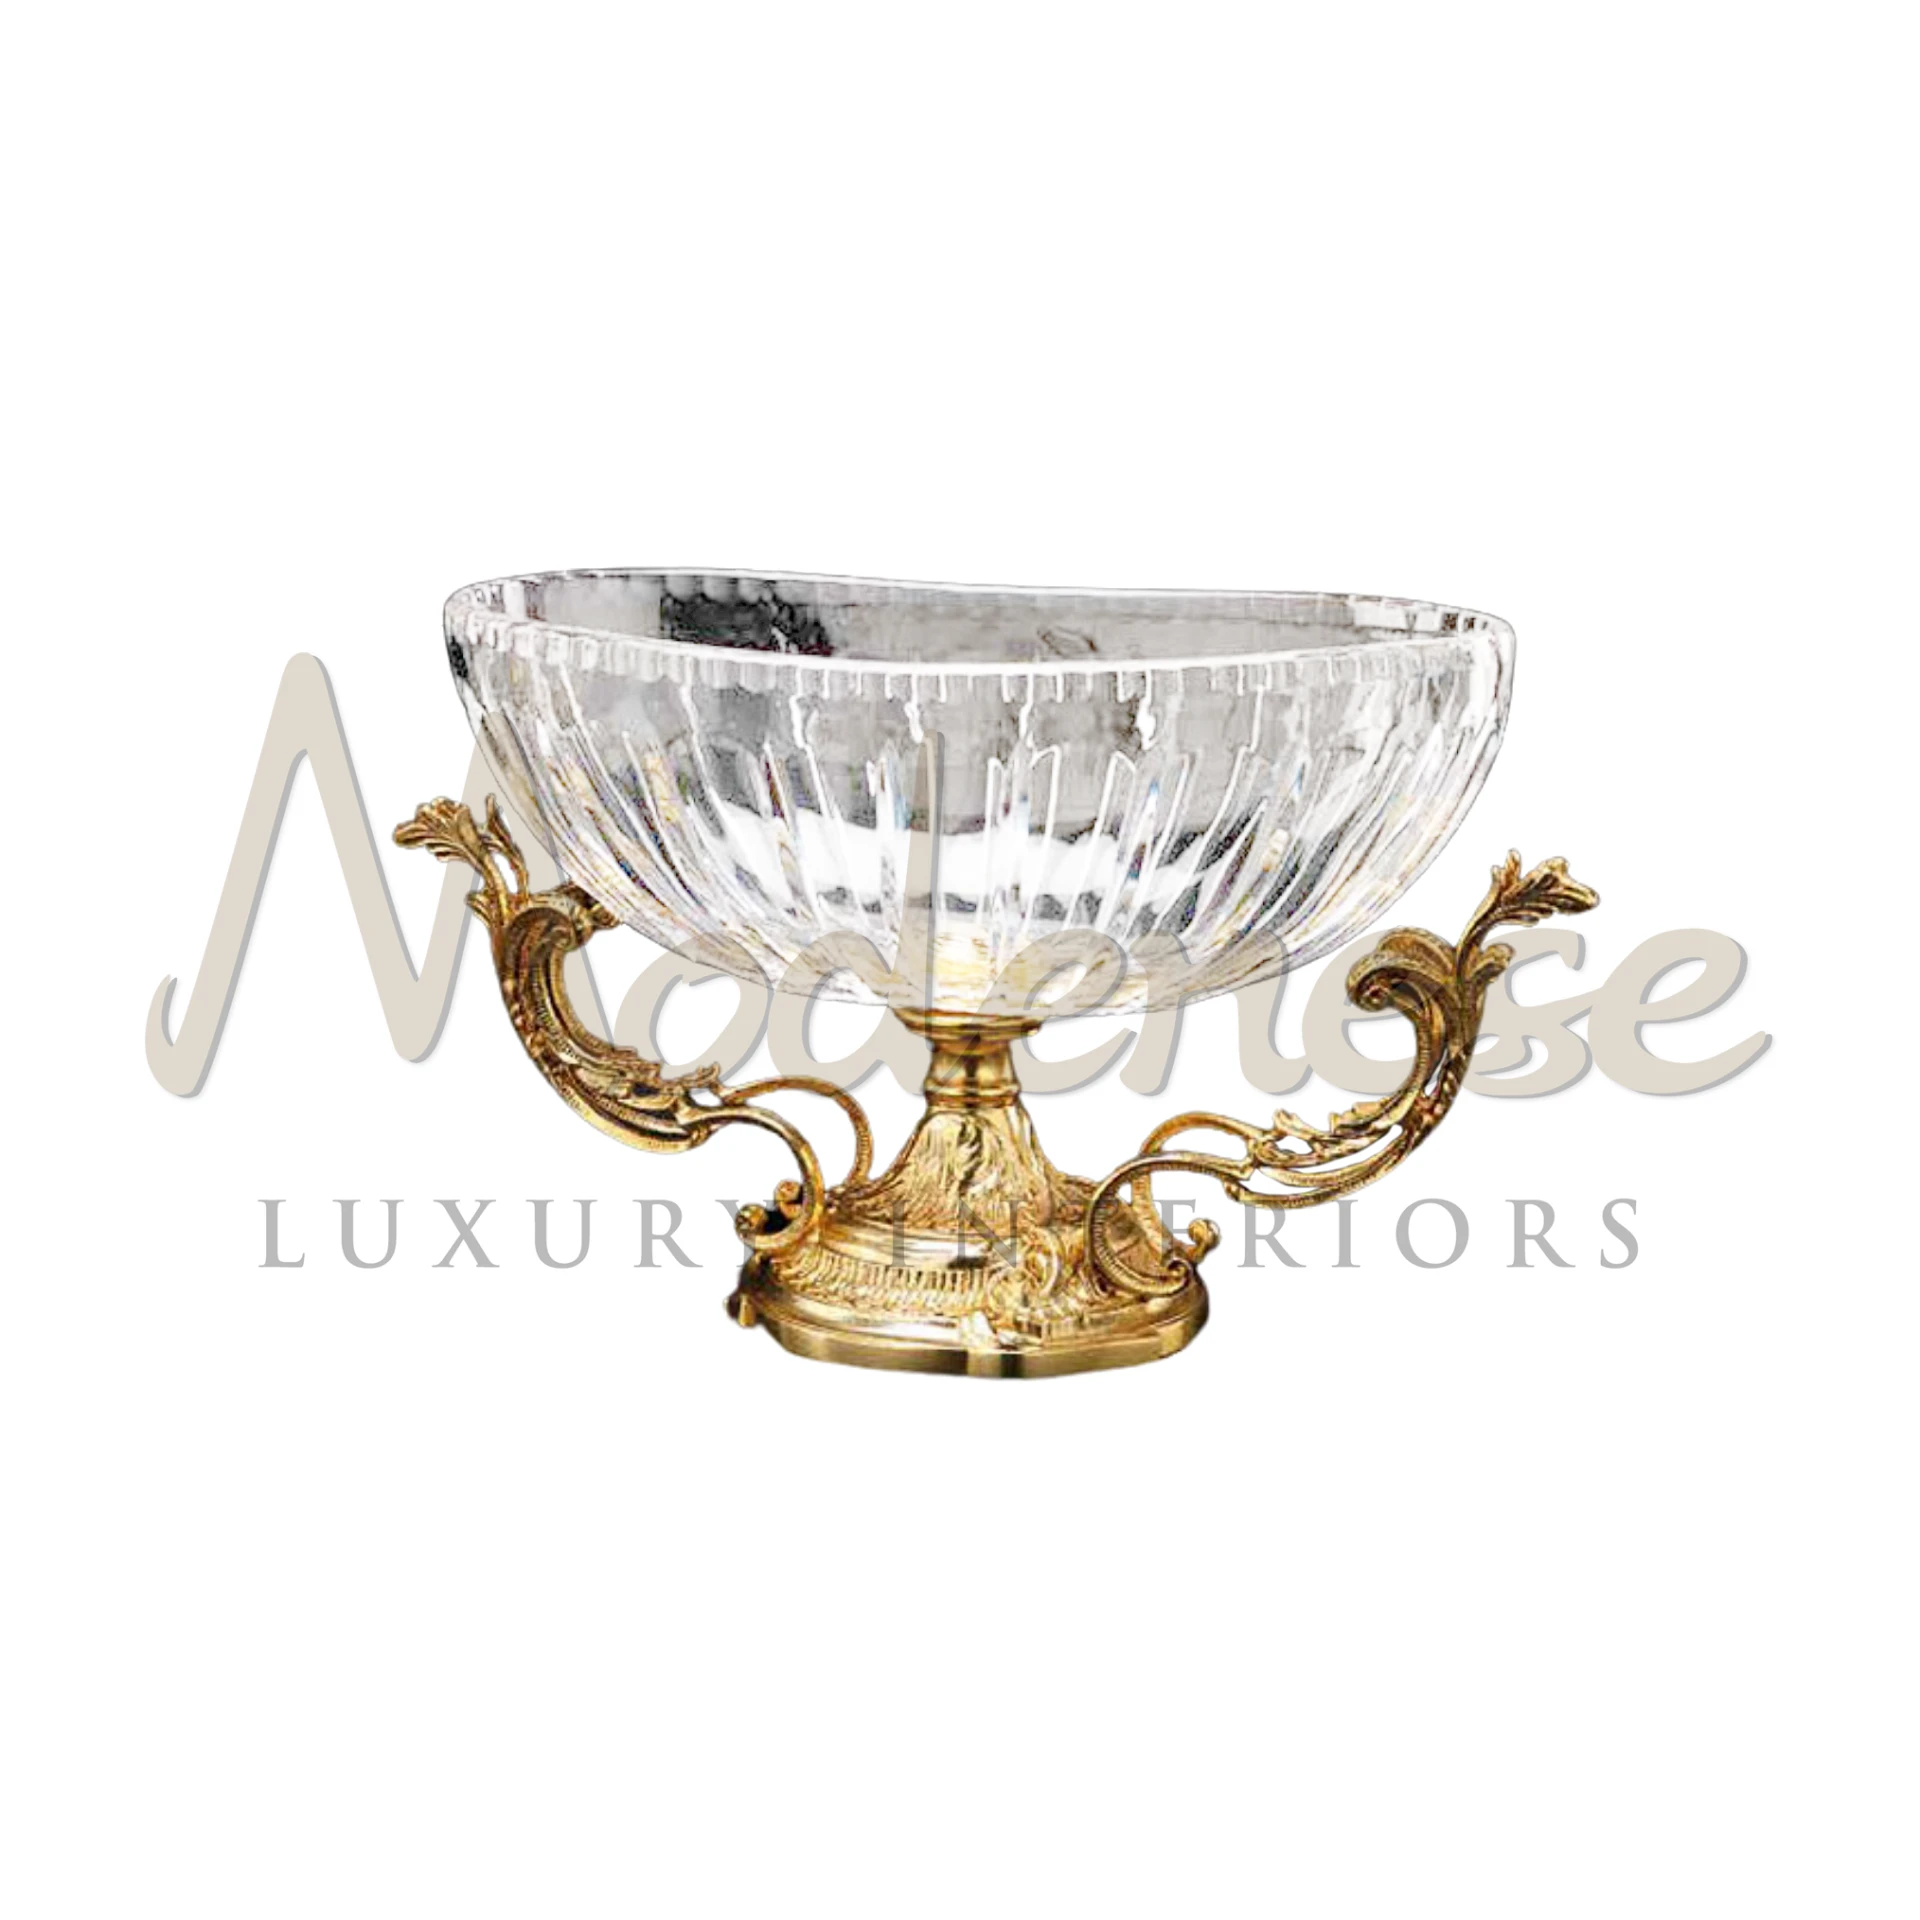 Modenese Furniture's Classical Crystal Bowl, a high-quality glass vase showcasing classic style and luxury interior design.